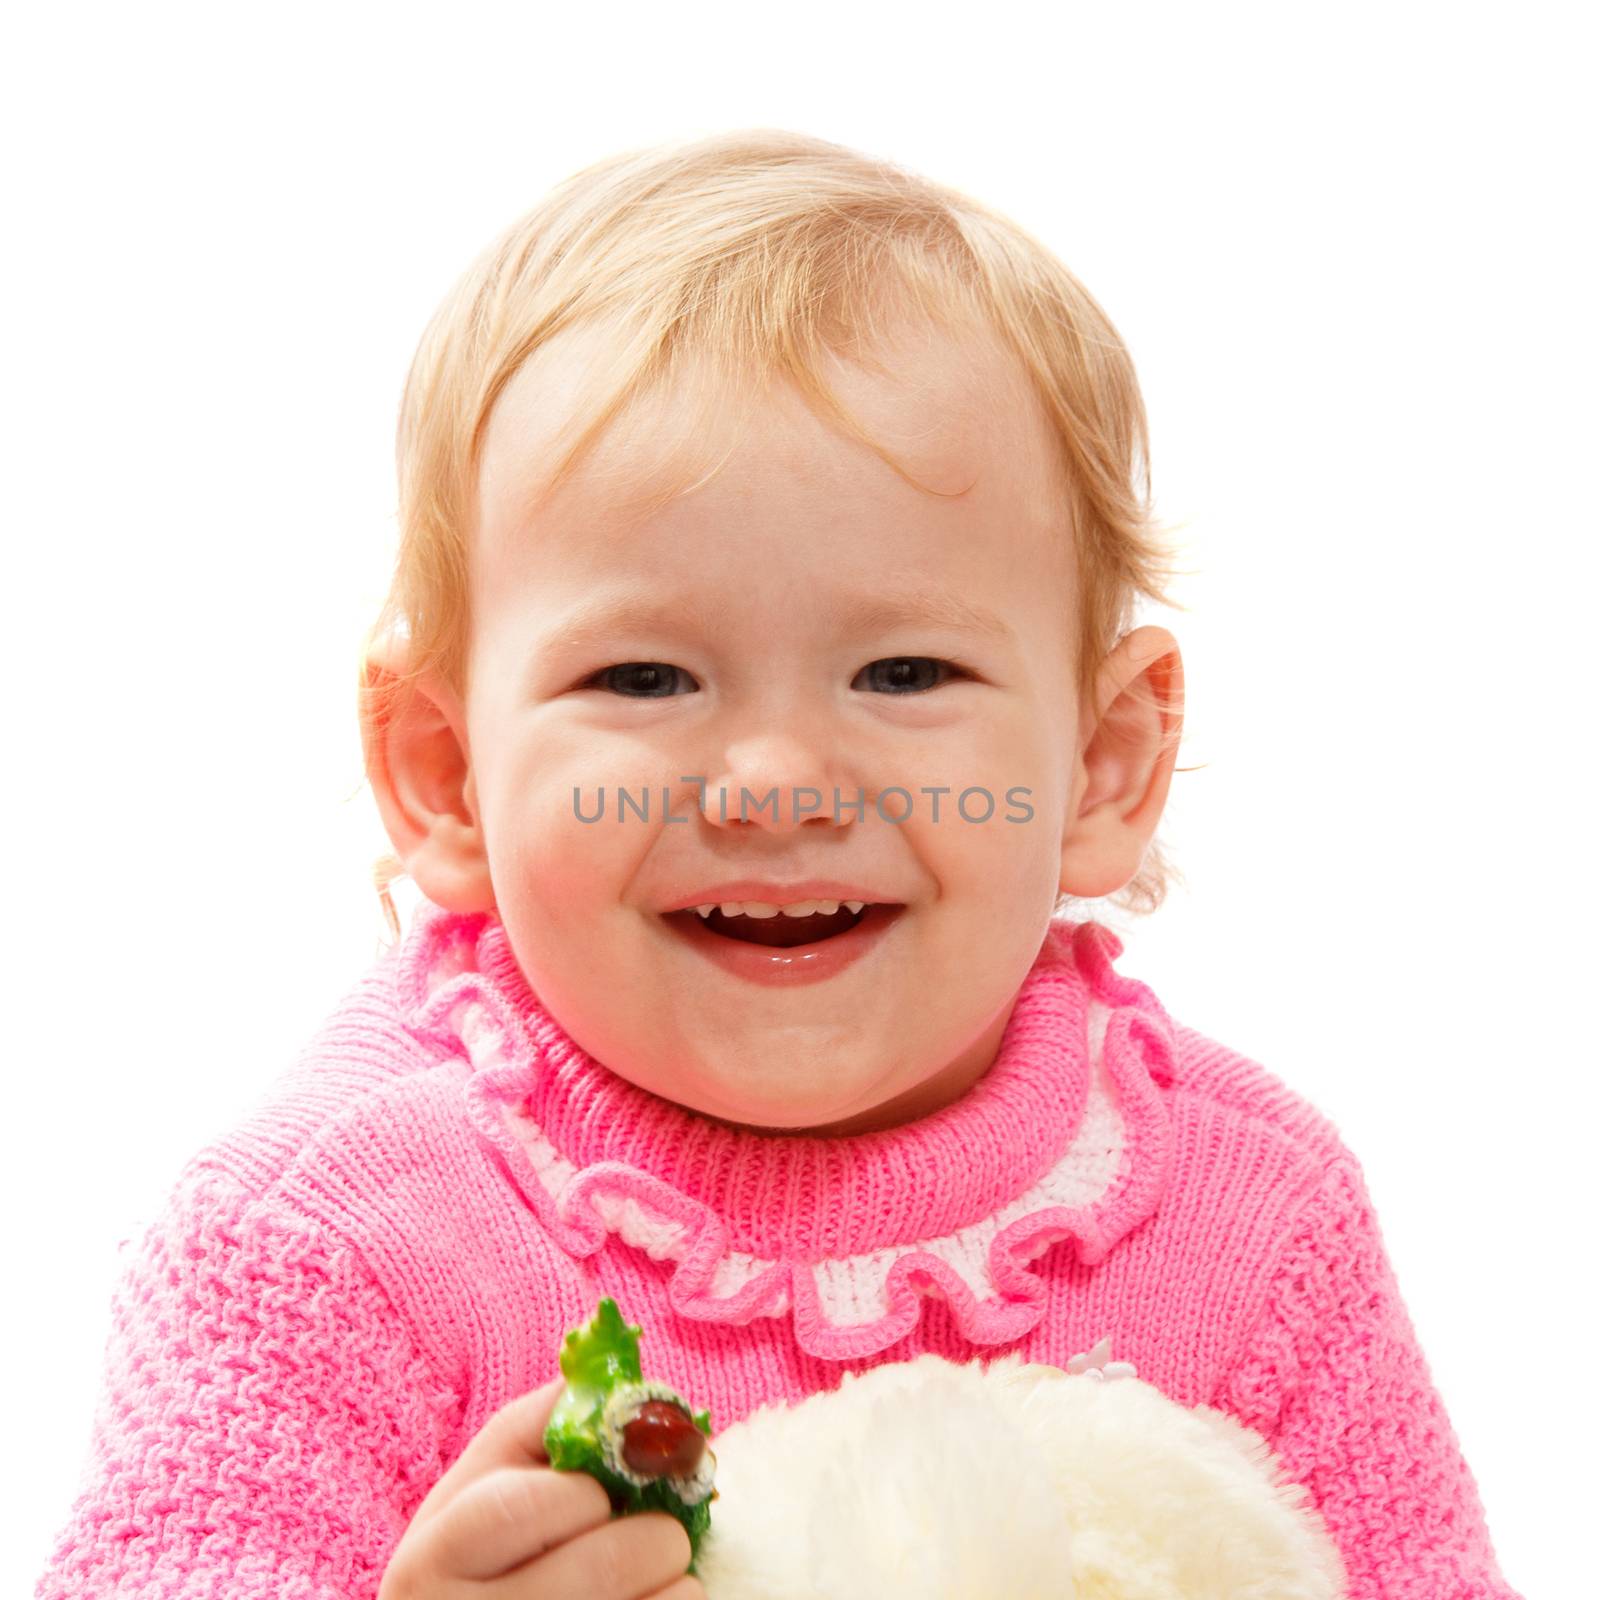 A very young blond baby girl smiling widely